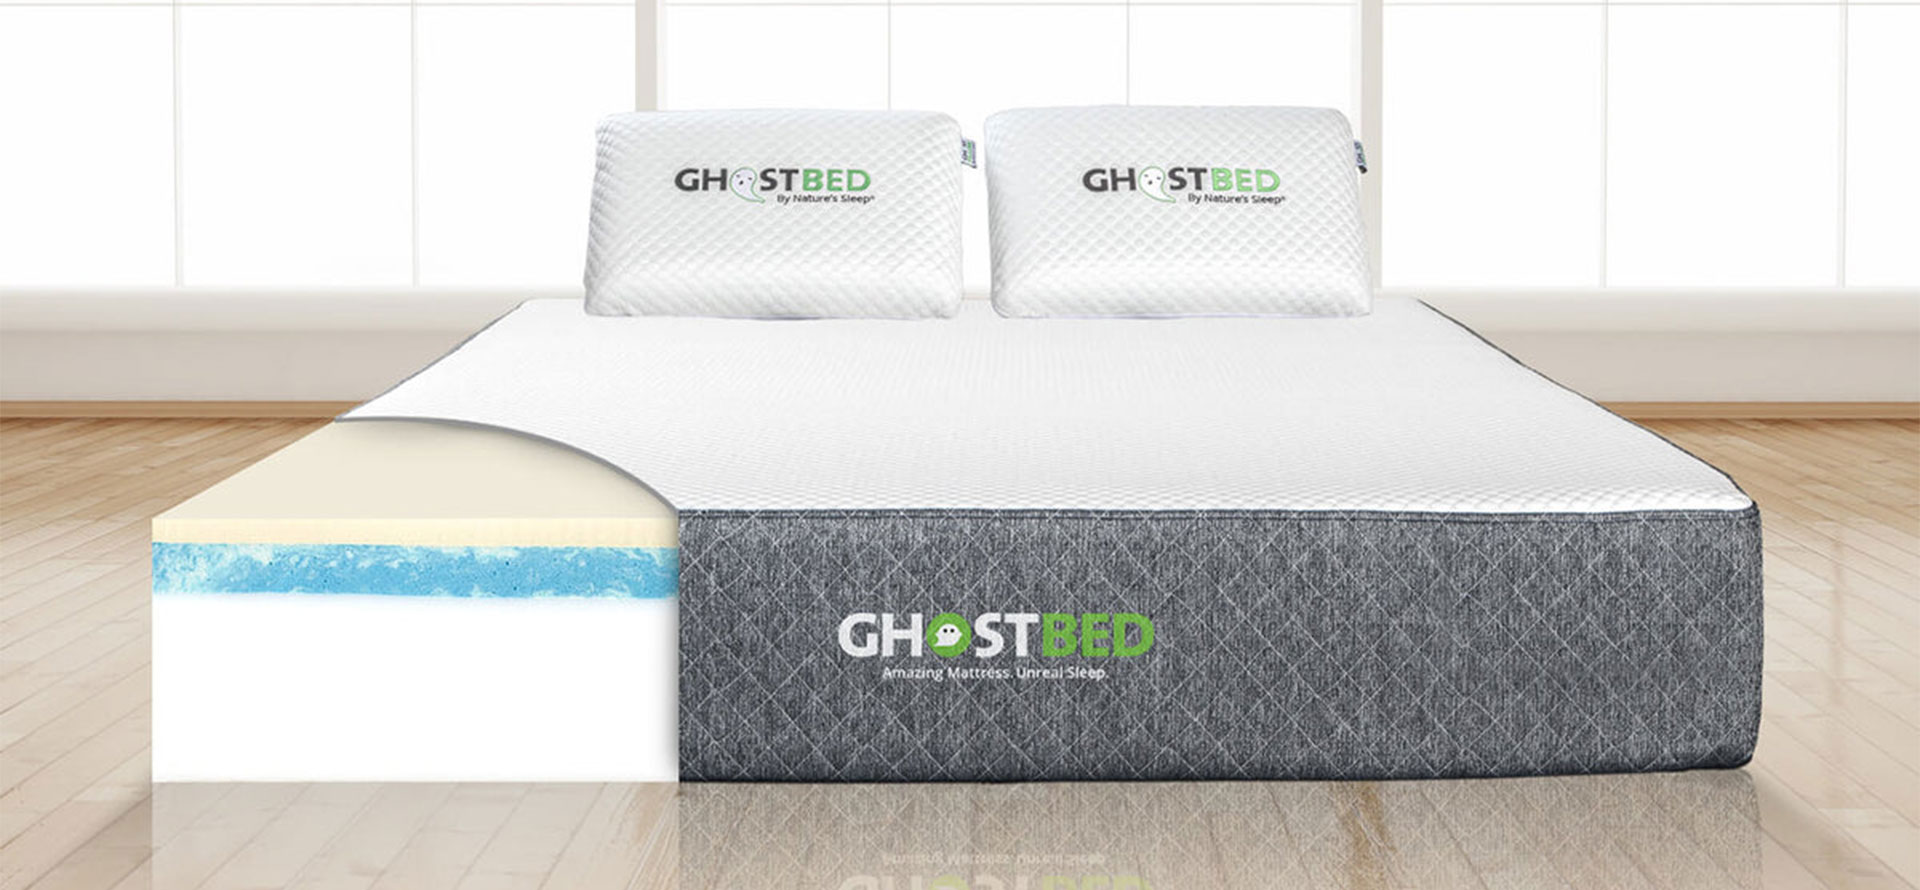 Ghostbed mattress and pillows.